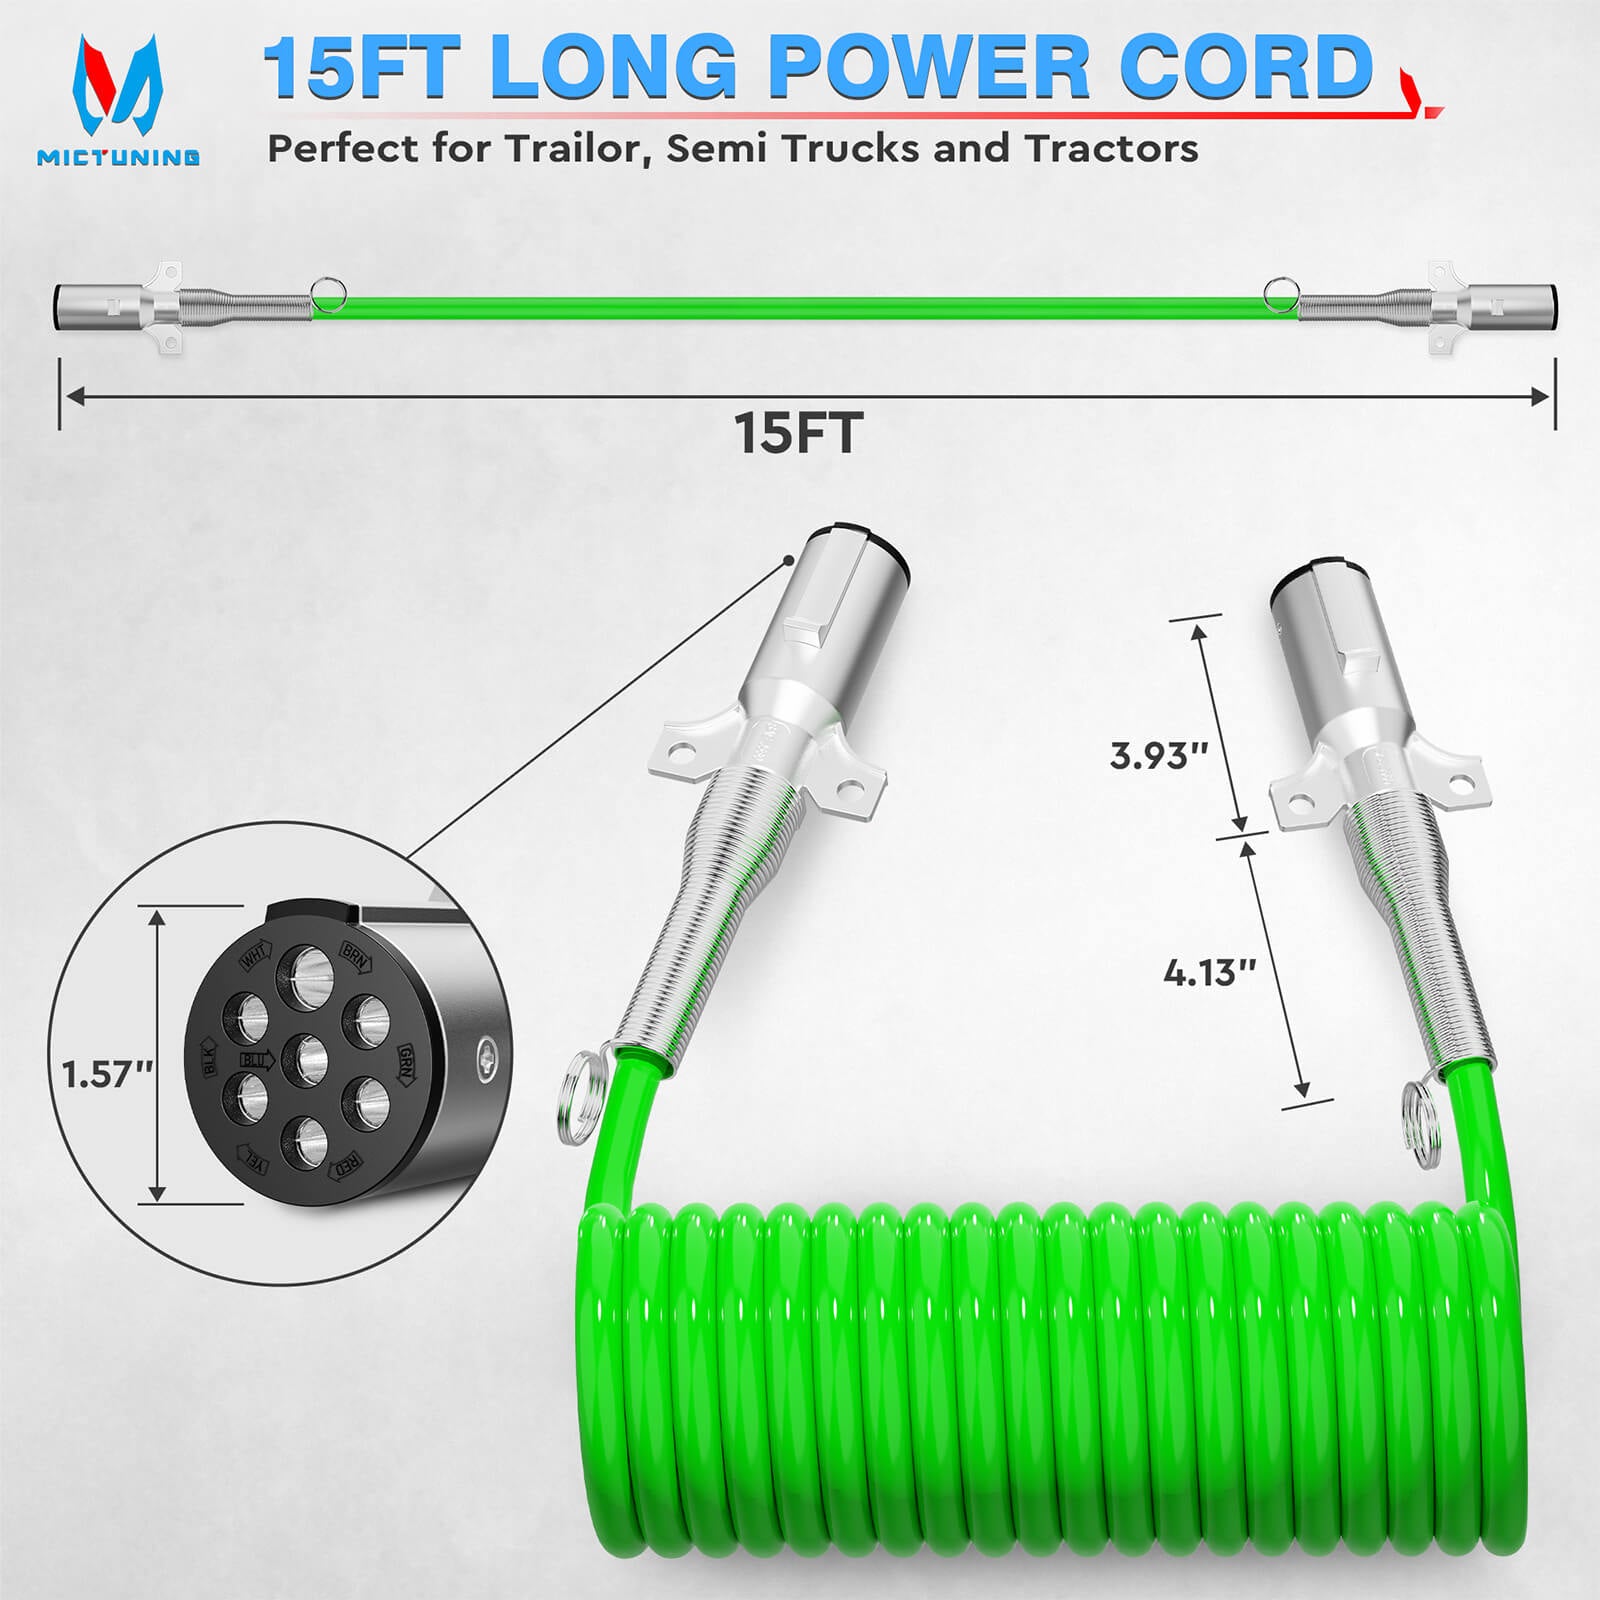 MICTUNING 7 Way Coiled Trailer Cord 15FT Green ABS Electrical